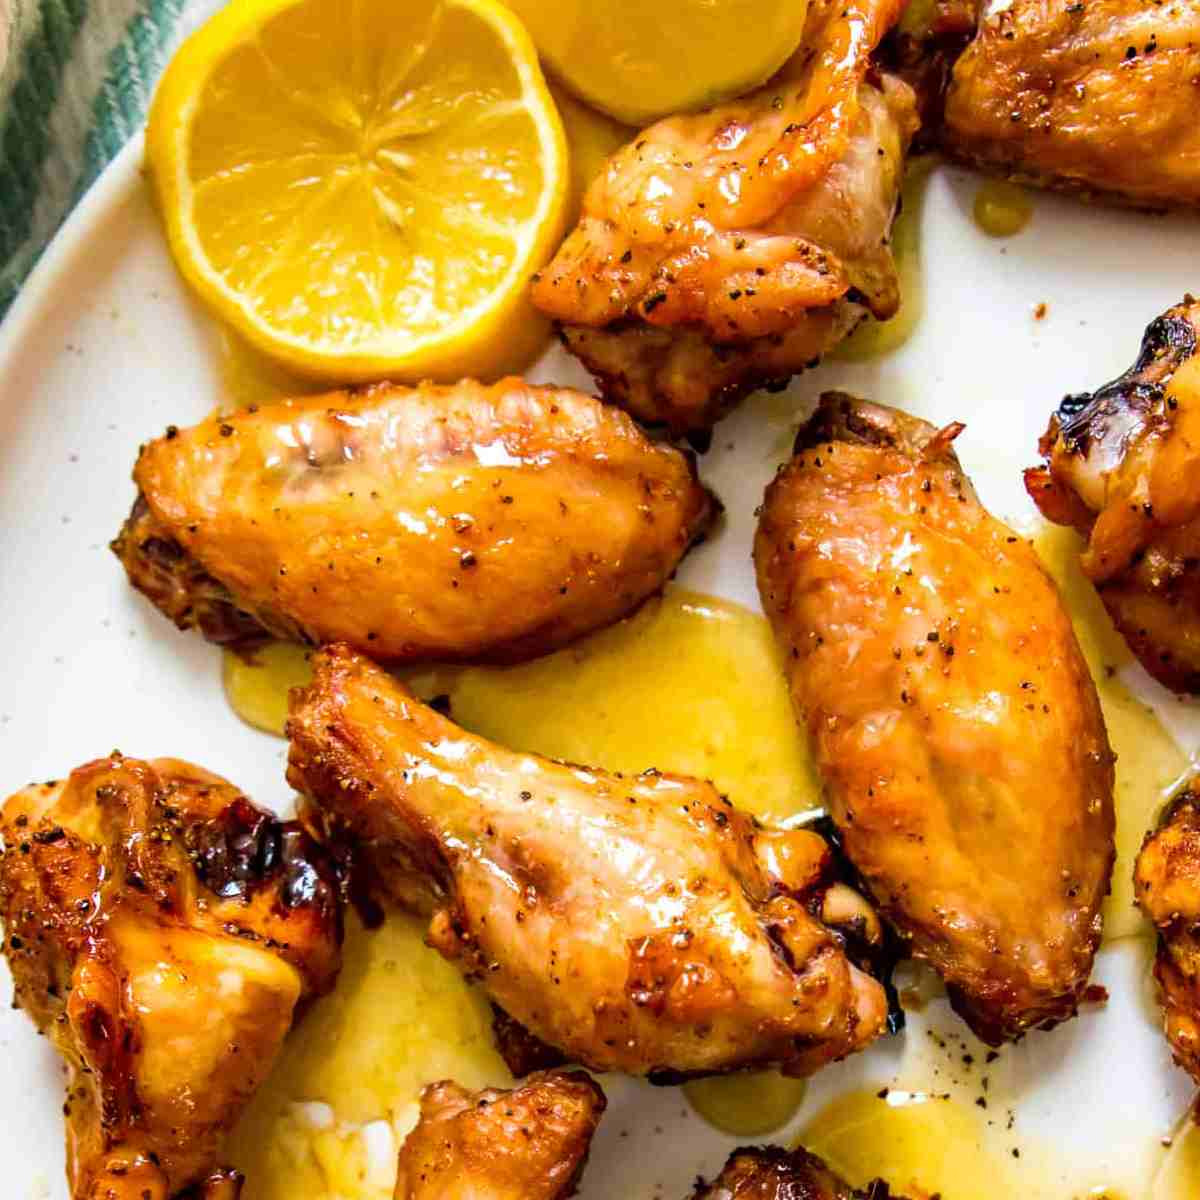 Chicken wings covered in yellow sauce with lemon slices on the side, all on a white plate.